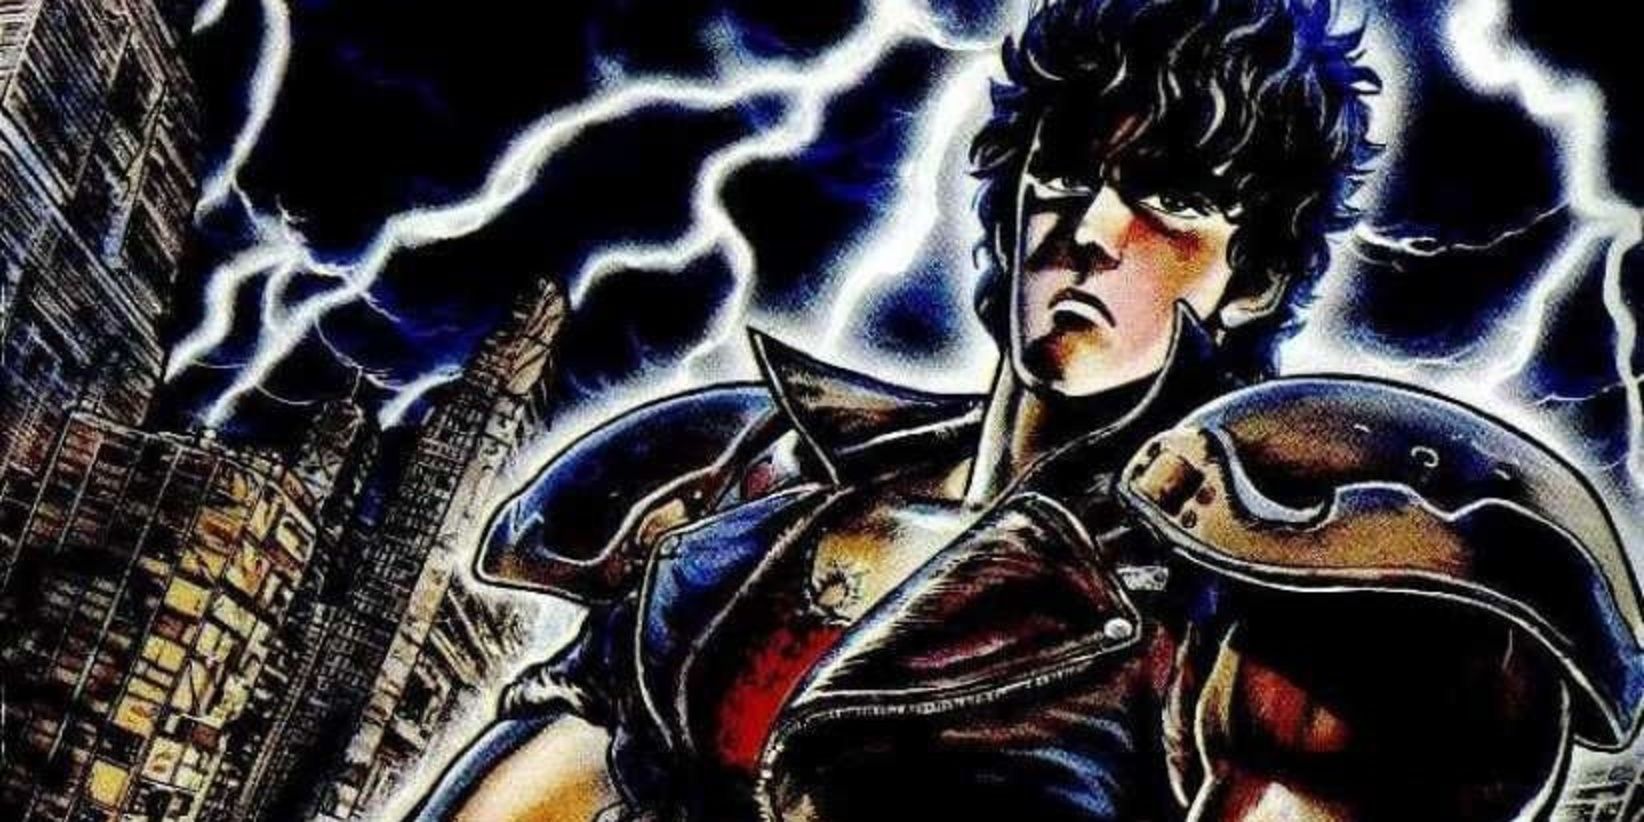 Kenshiro wreathed with lightning in the best manga art Fist of the North Star